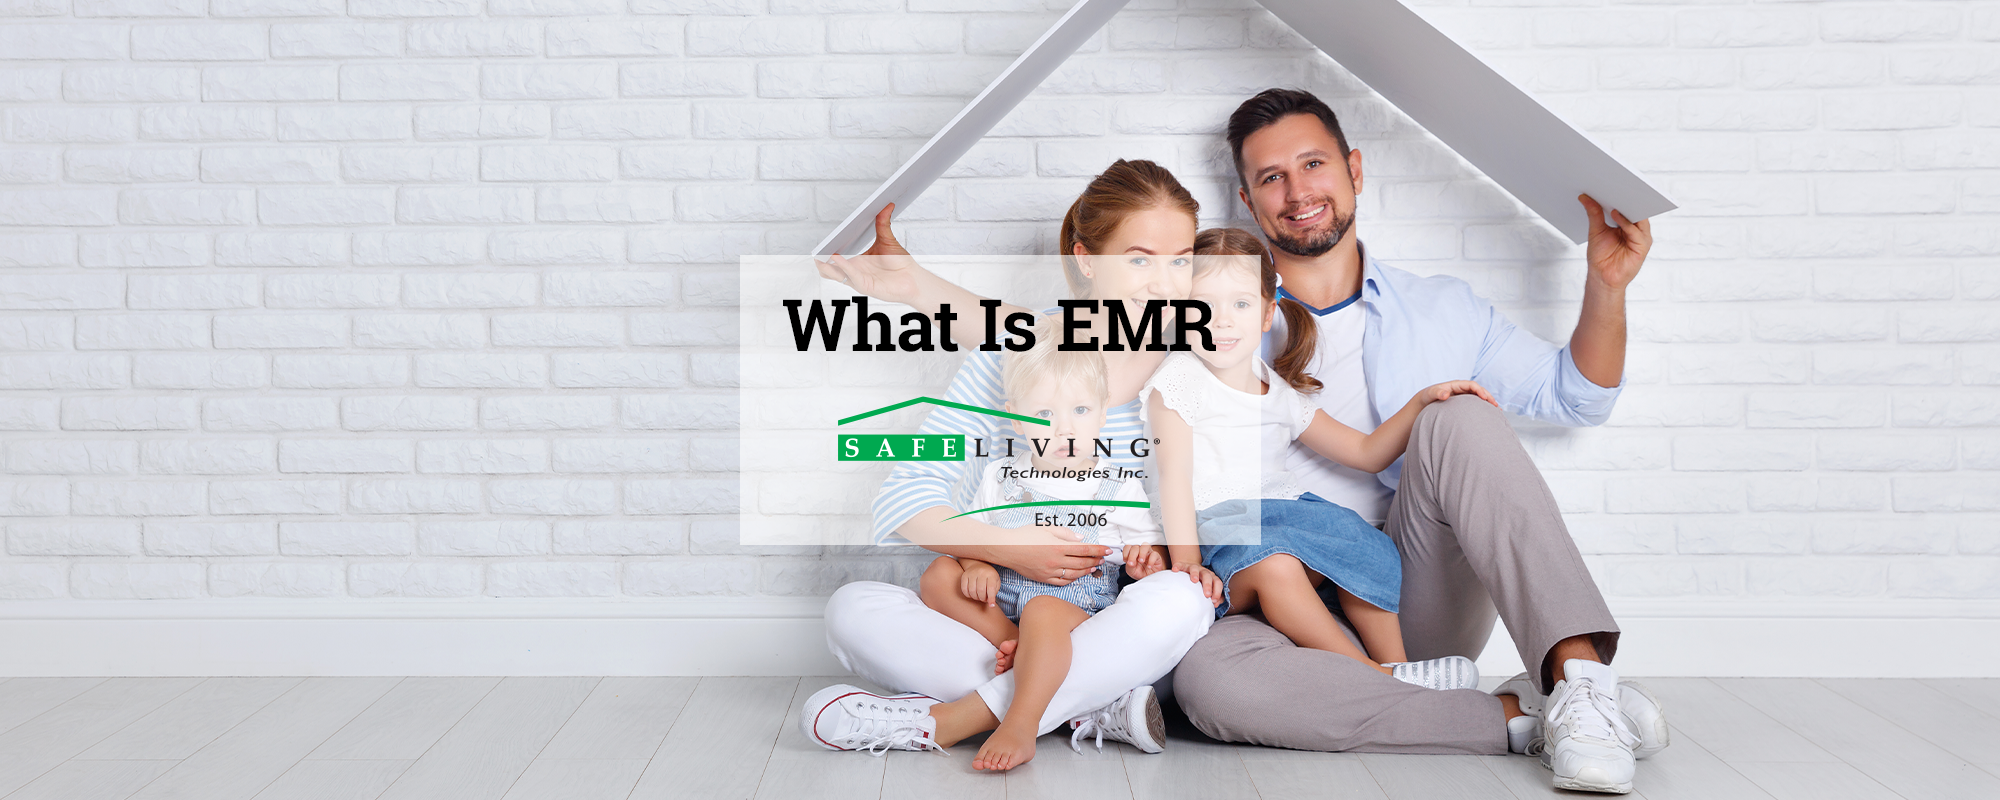 What Is EMR